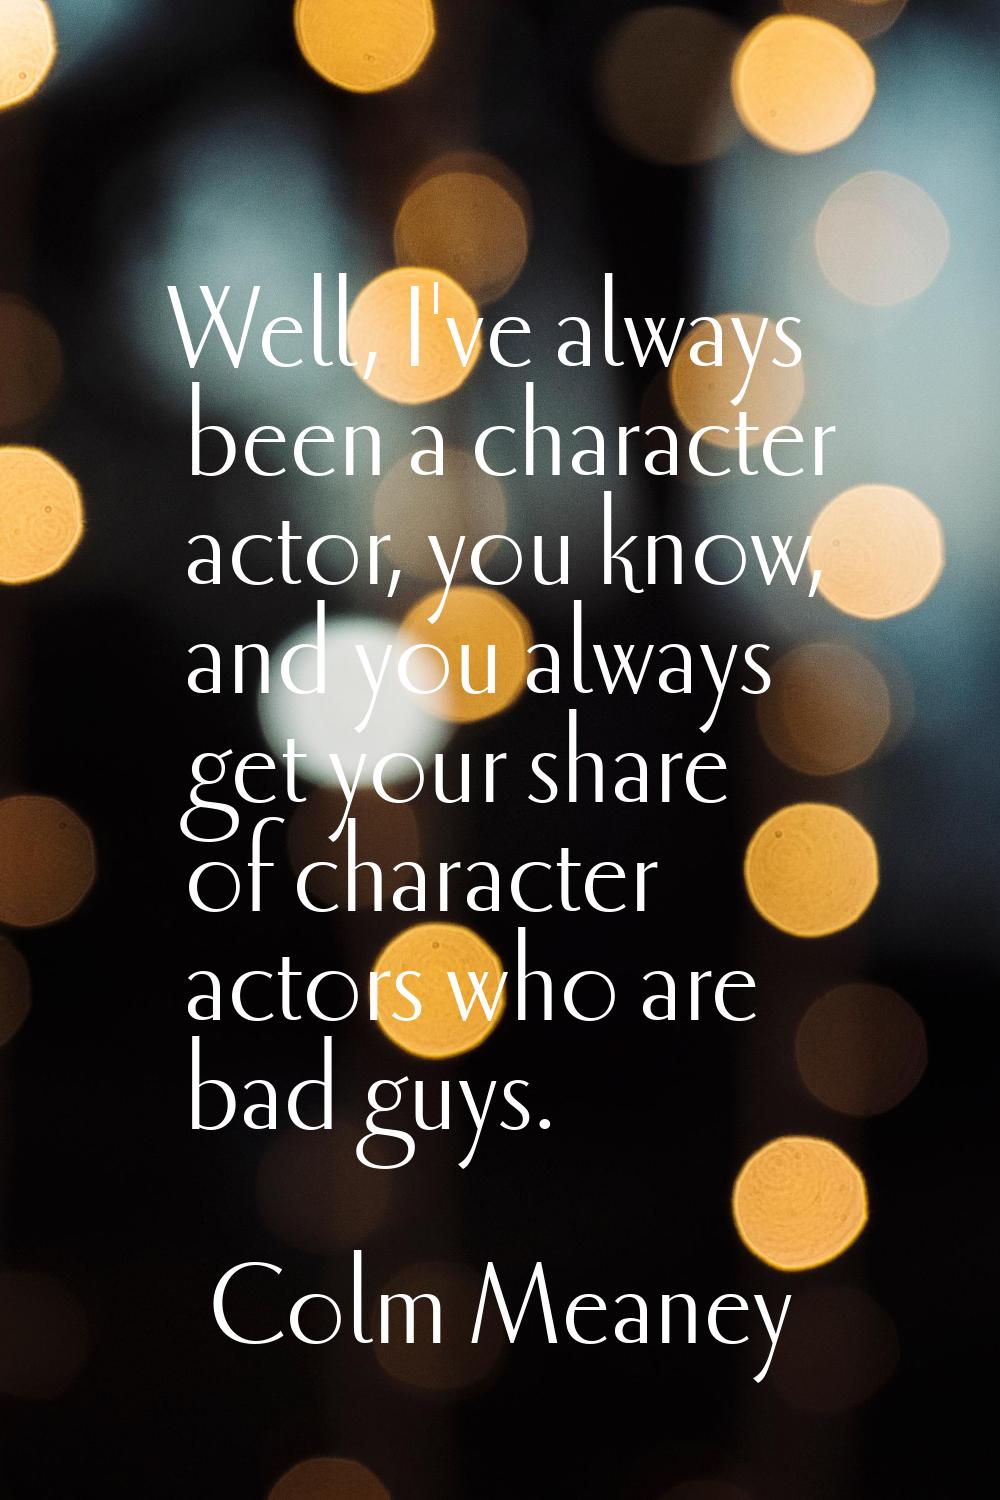 Well, I've always been a character actor, you know, and you always get your share of character acto